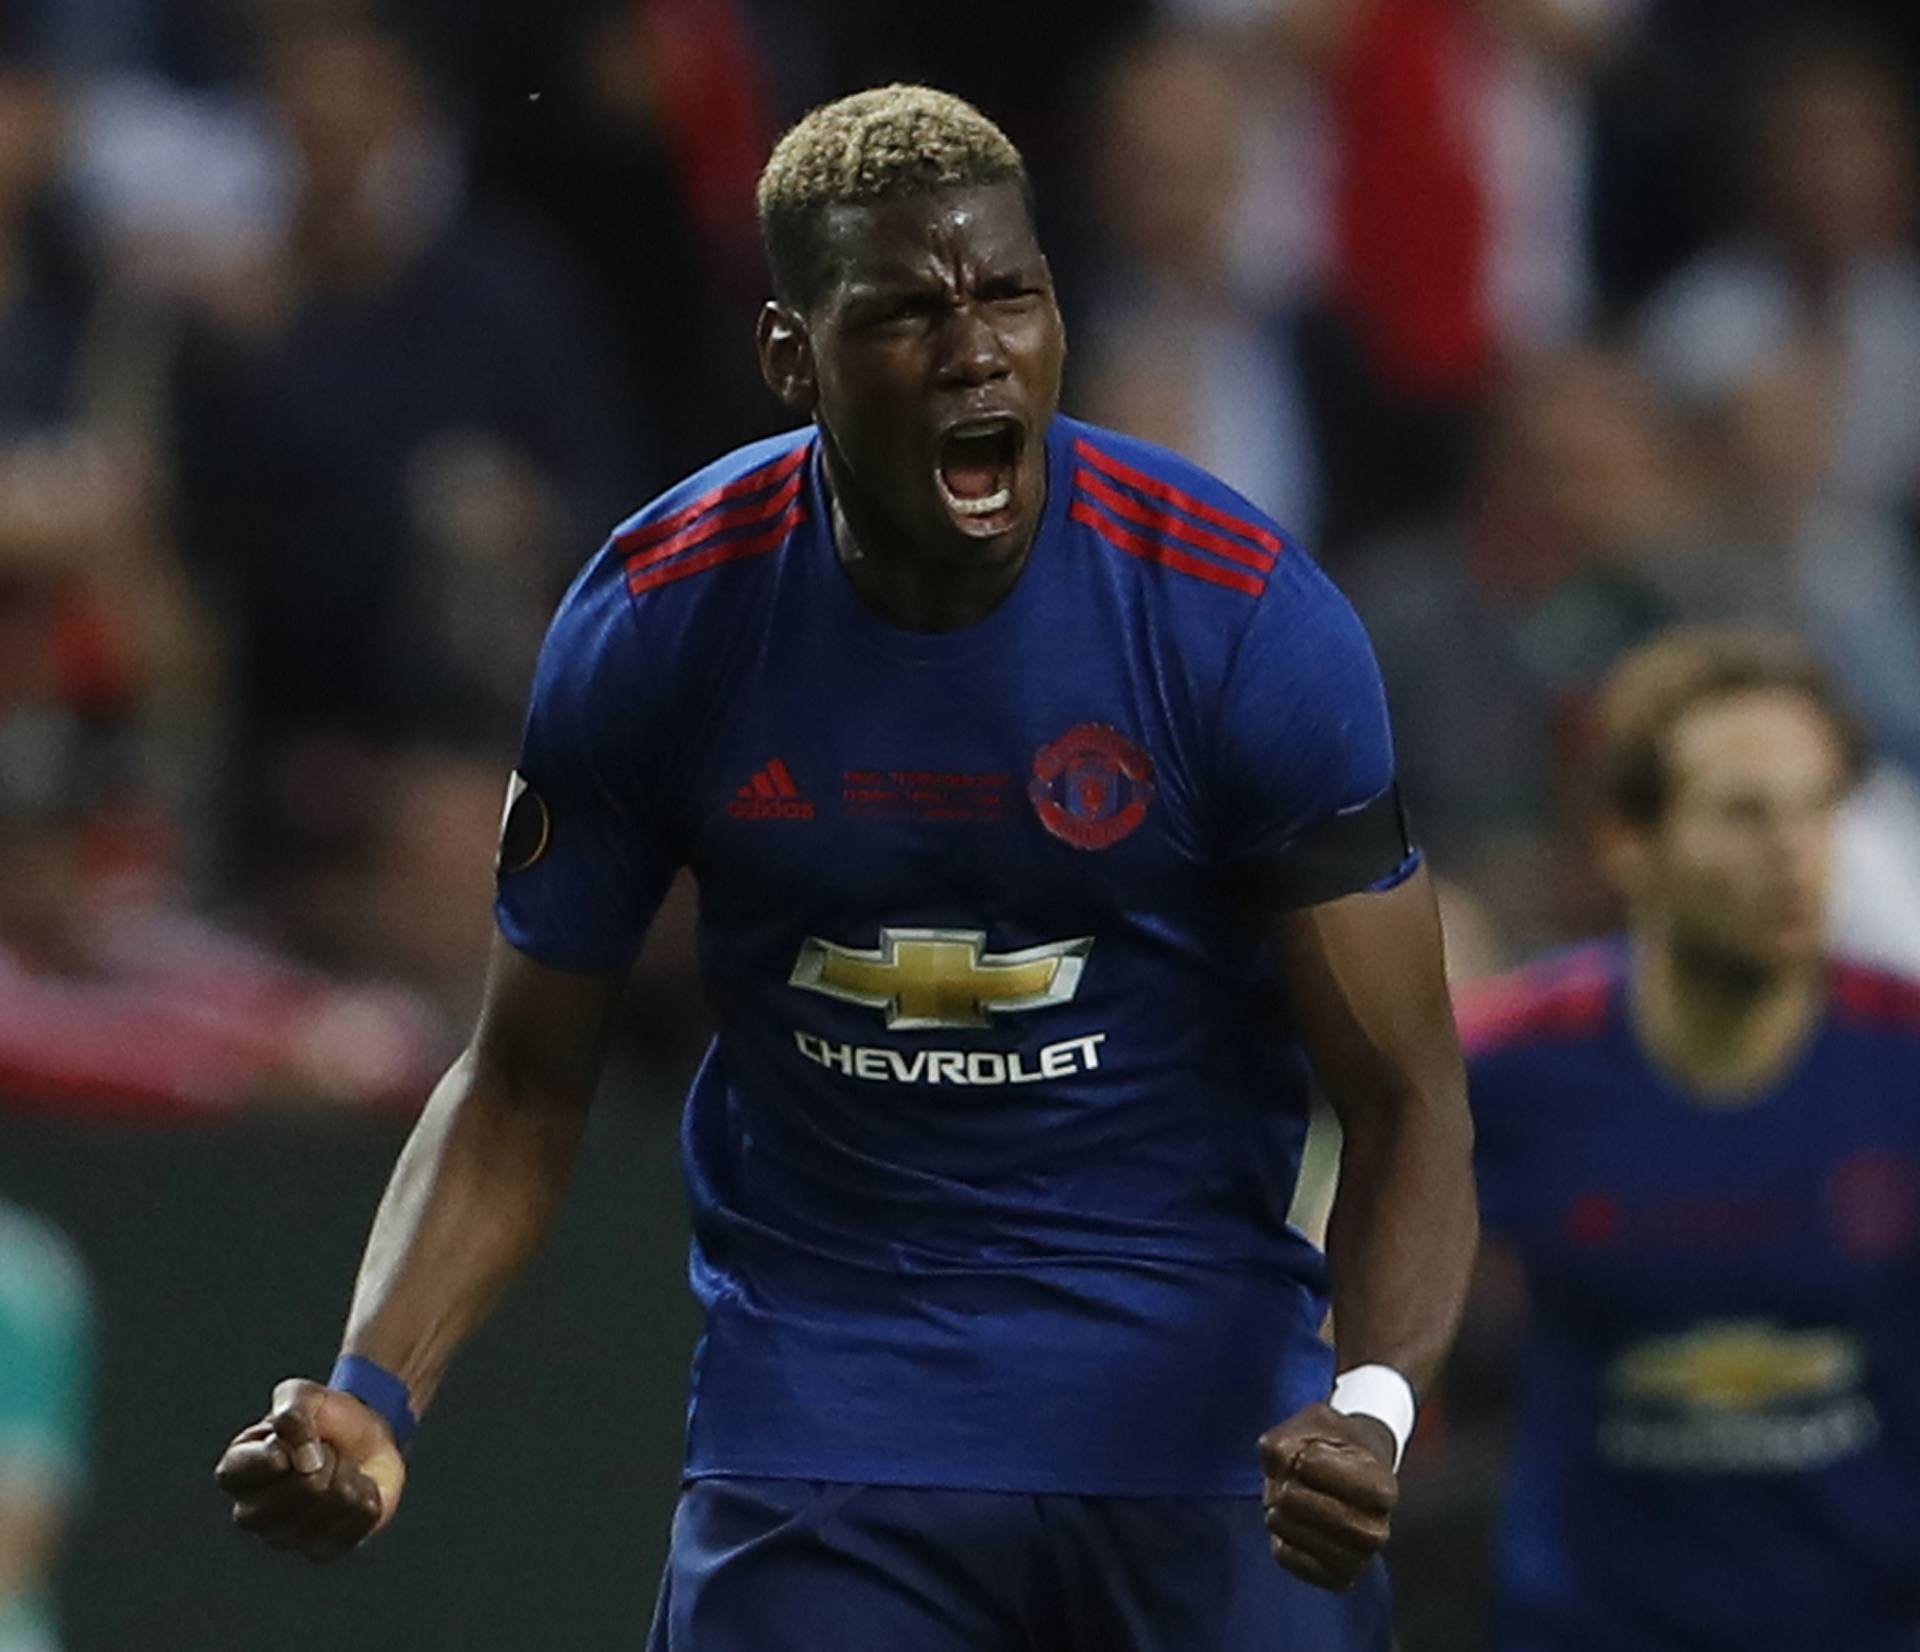 Manchester United's Paul Pogba celebrates scoring their first goal